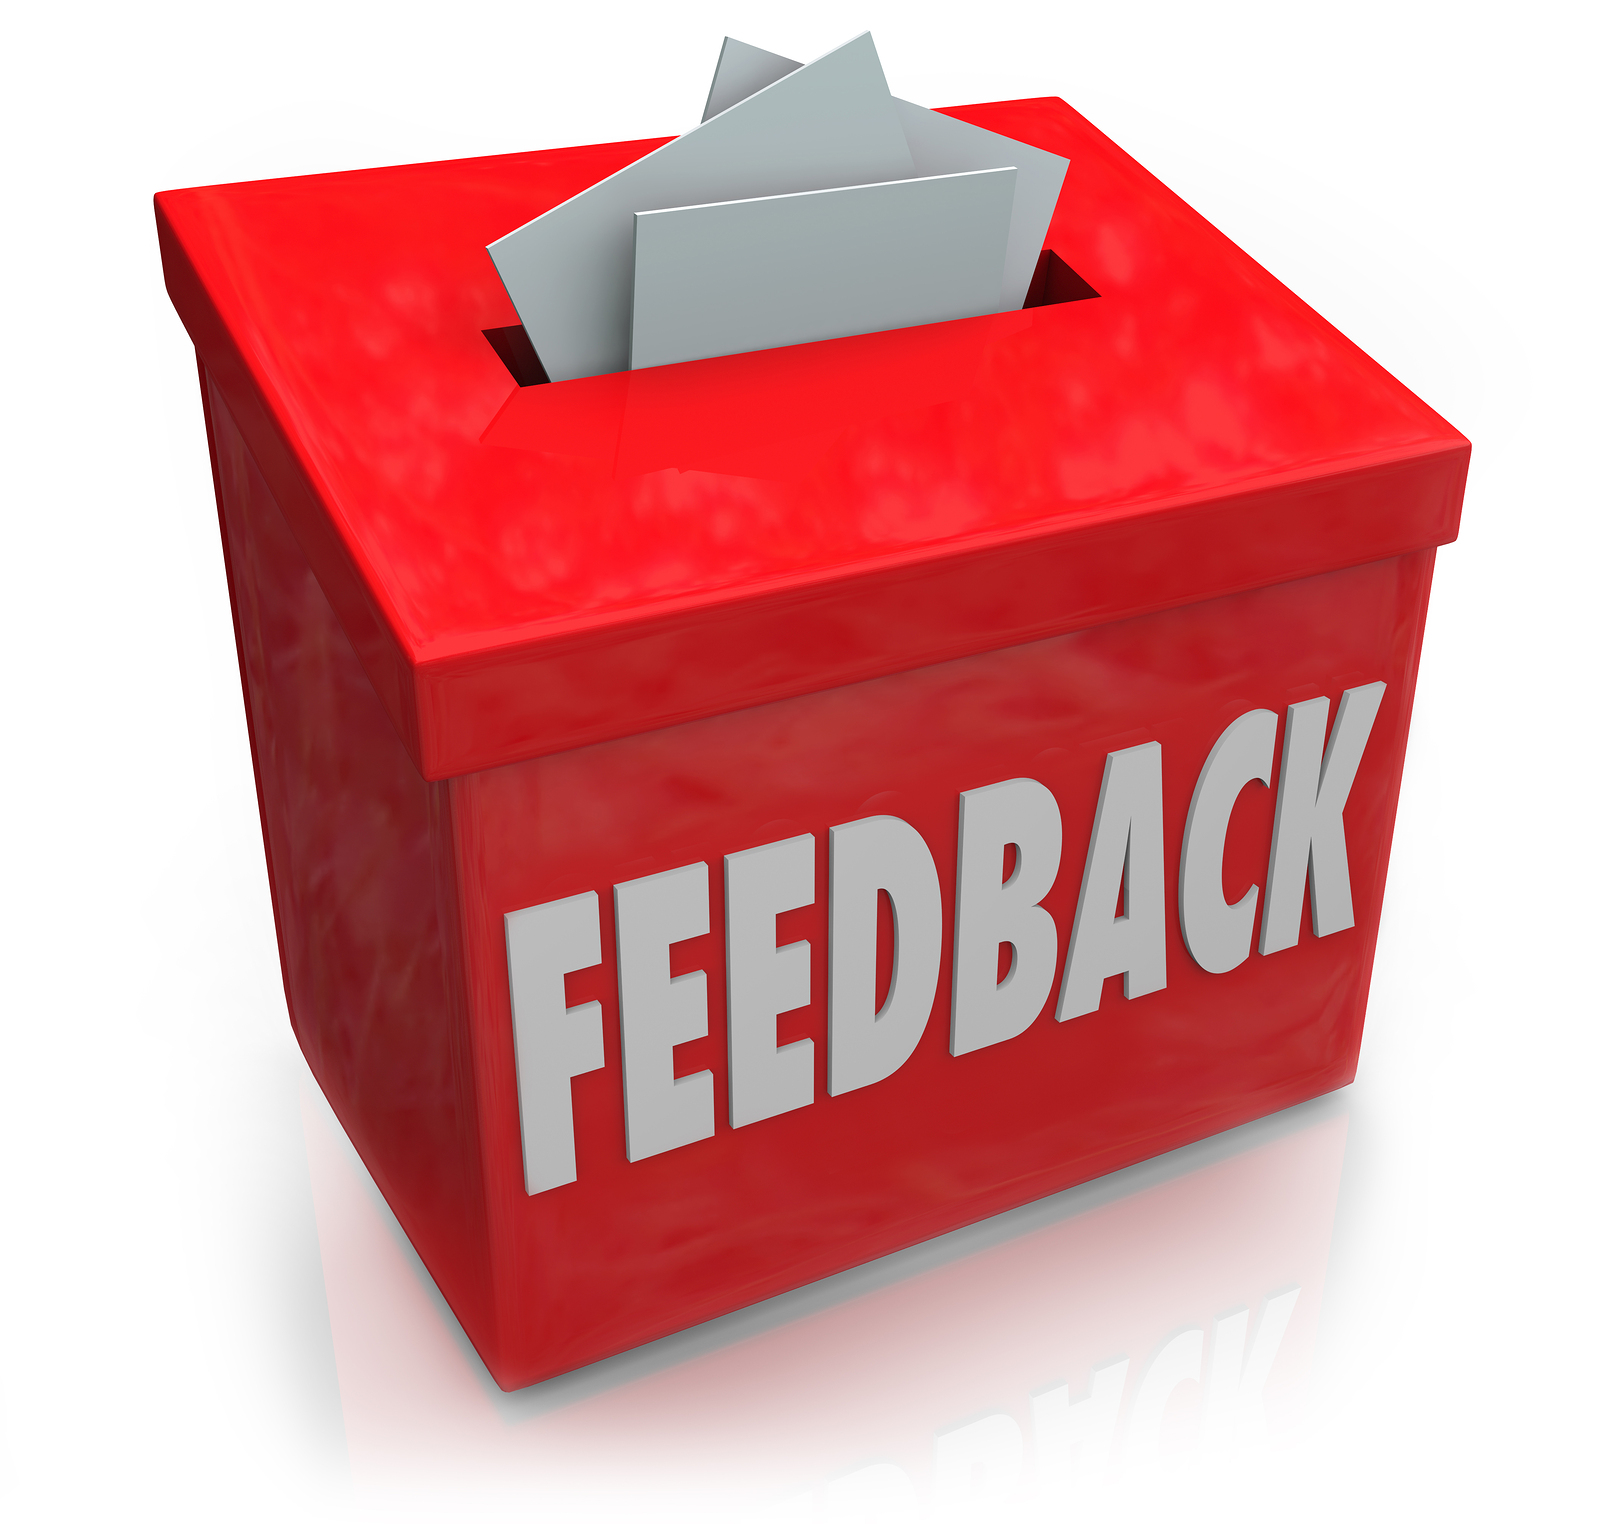 Feedback Fridays: A Fun and Effective Way to Engage Employees